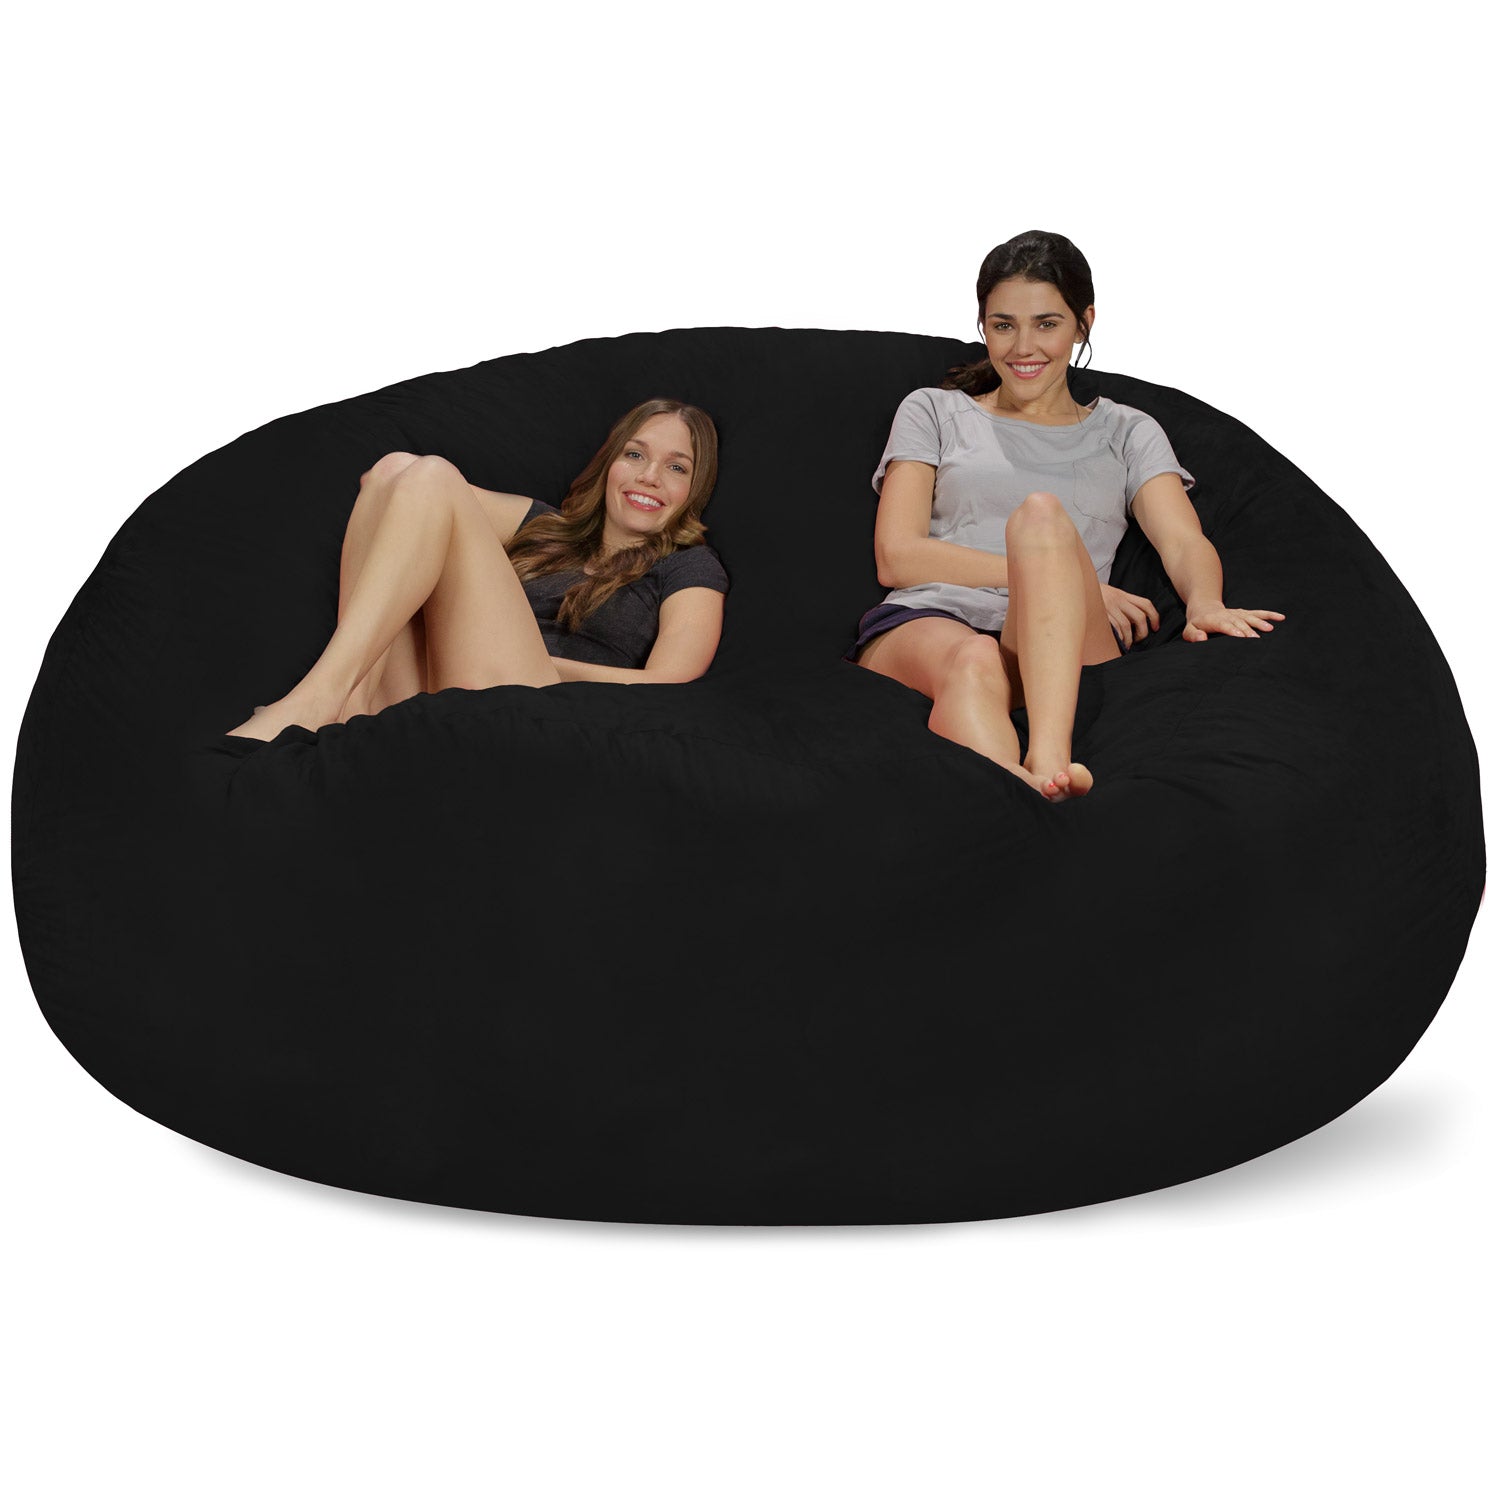 Shopping for Beanbag Chairs - The New York Times